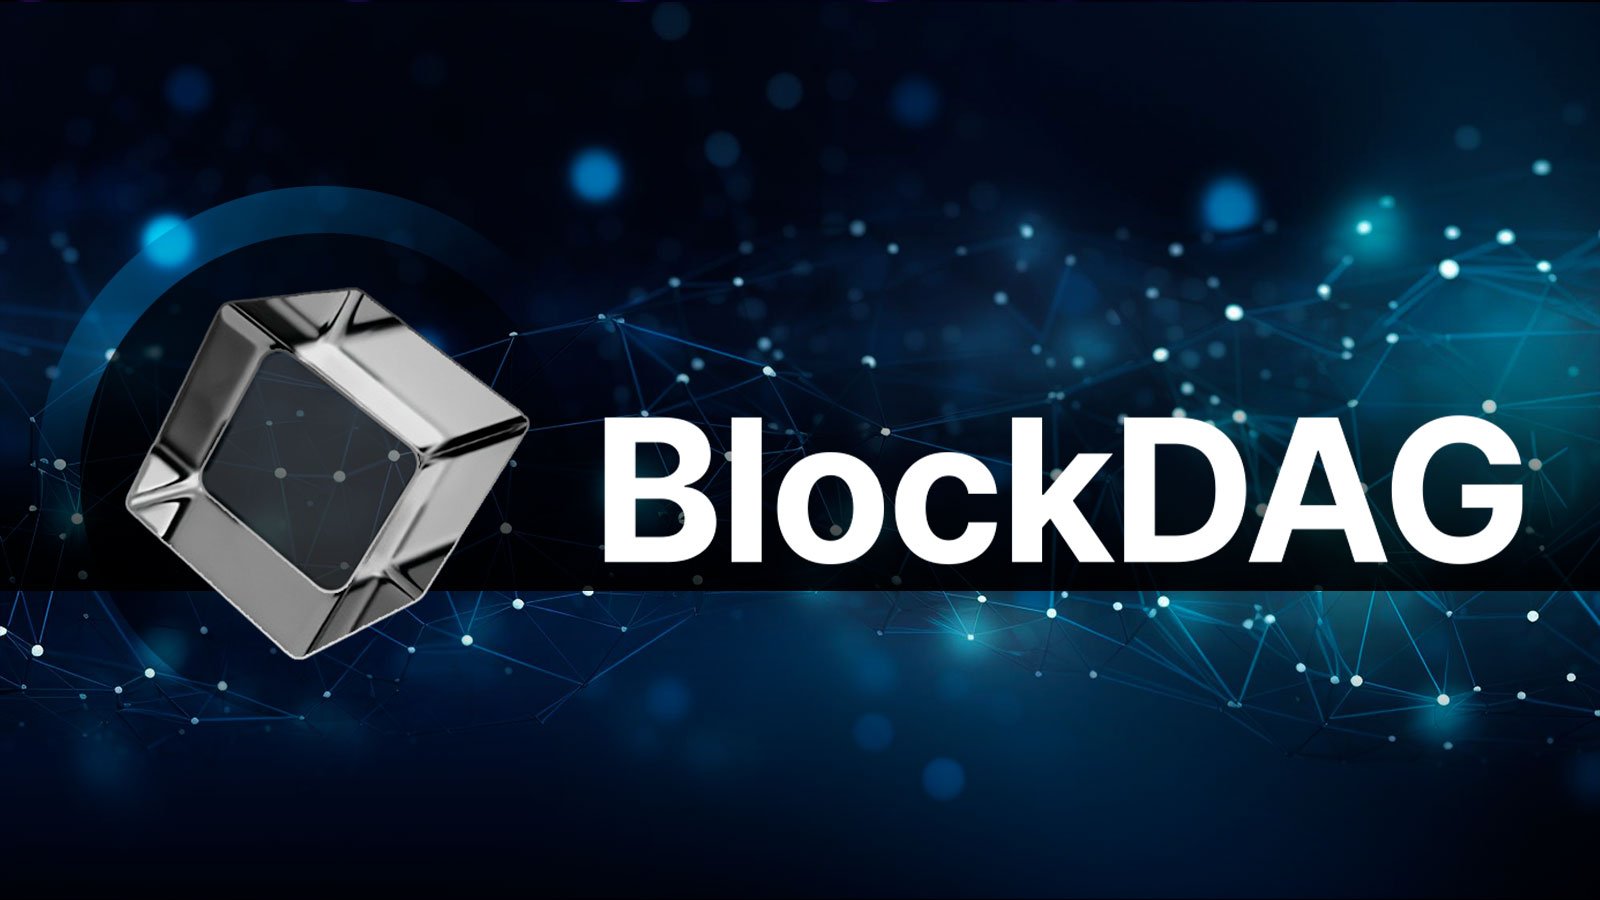 As BlockDAG Keynote Reveals Key Strengths, Solana and Thorchain Gain Traction